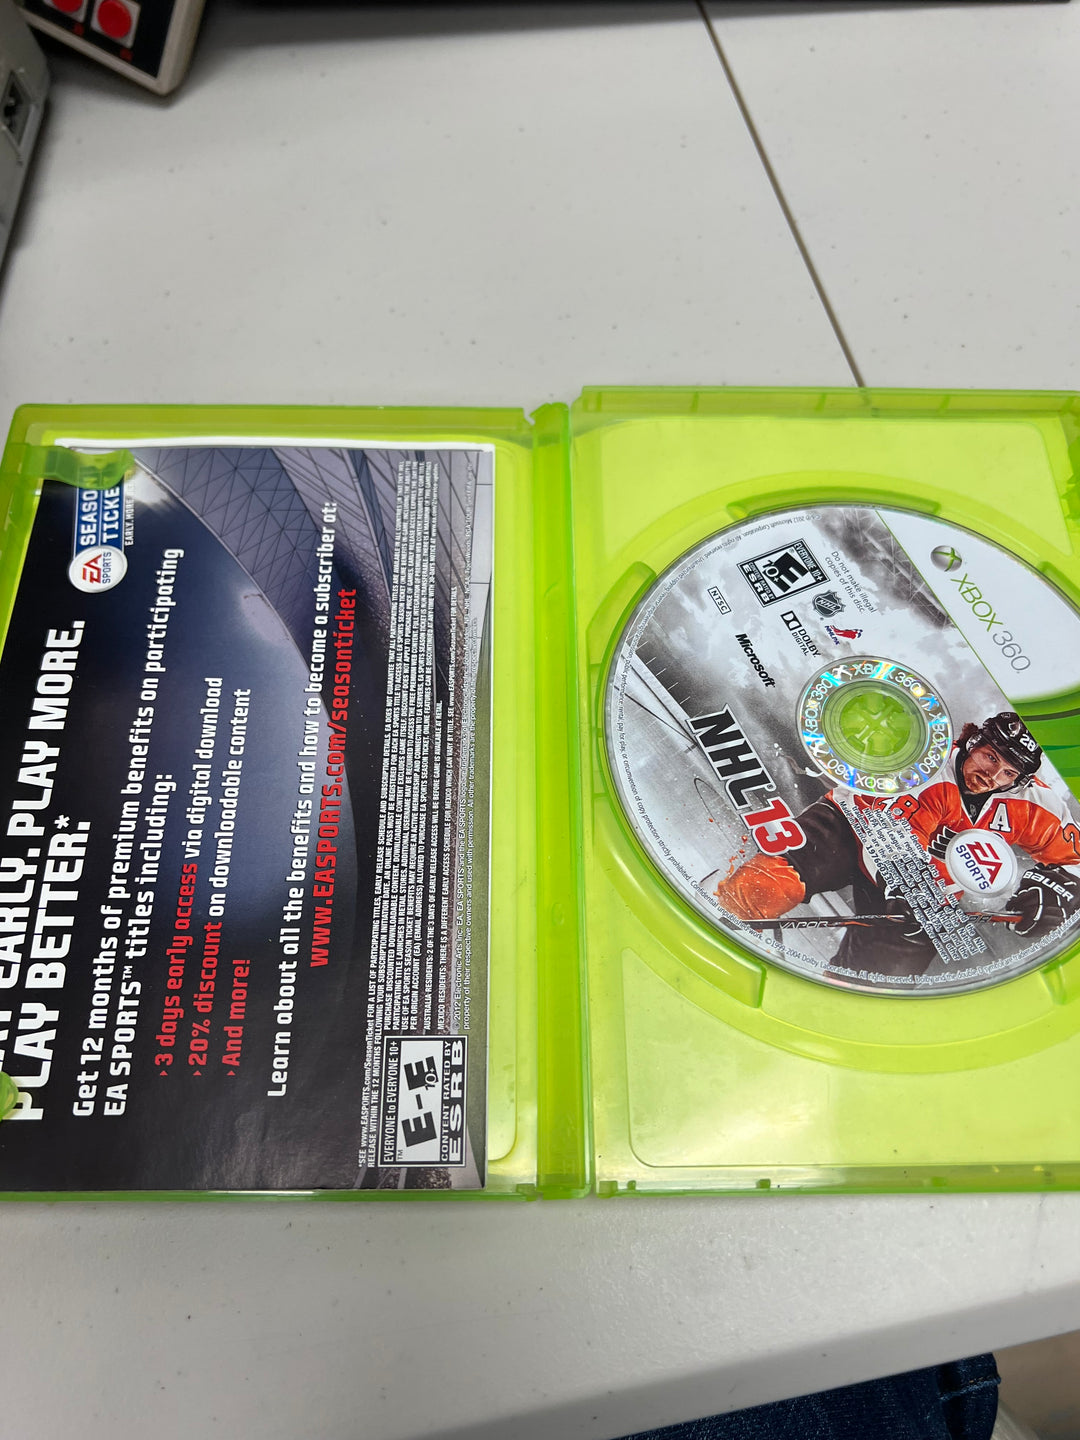 NHL 13 for Microsoft Xbox 360 in case. Tested and working.     DO61024